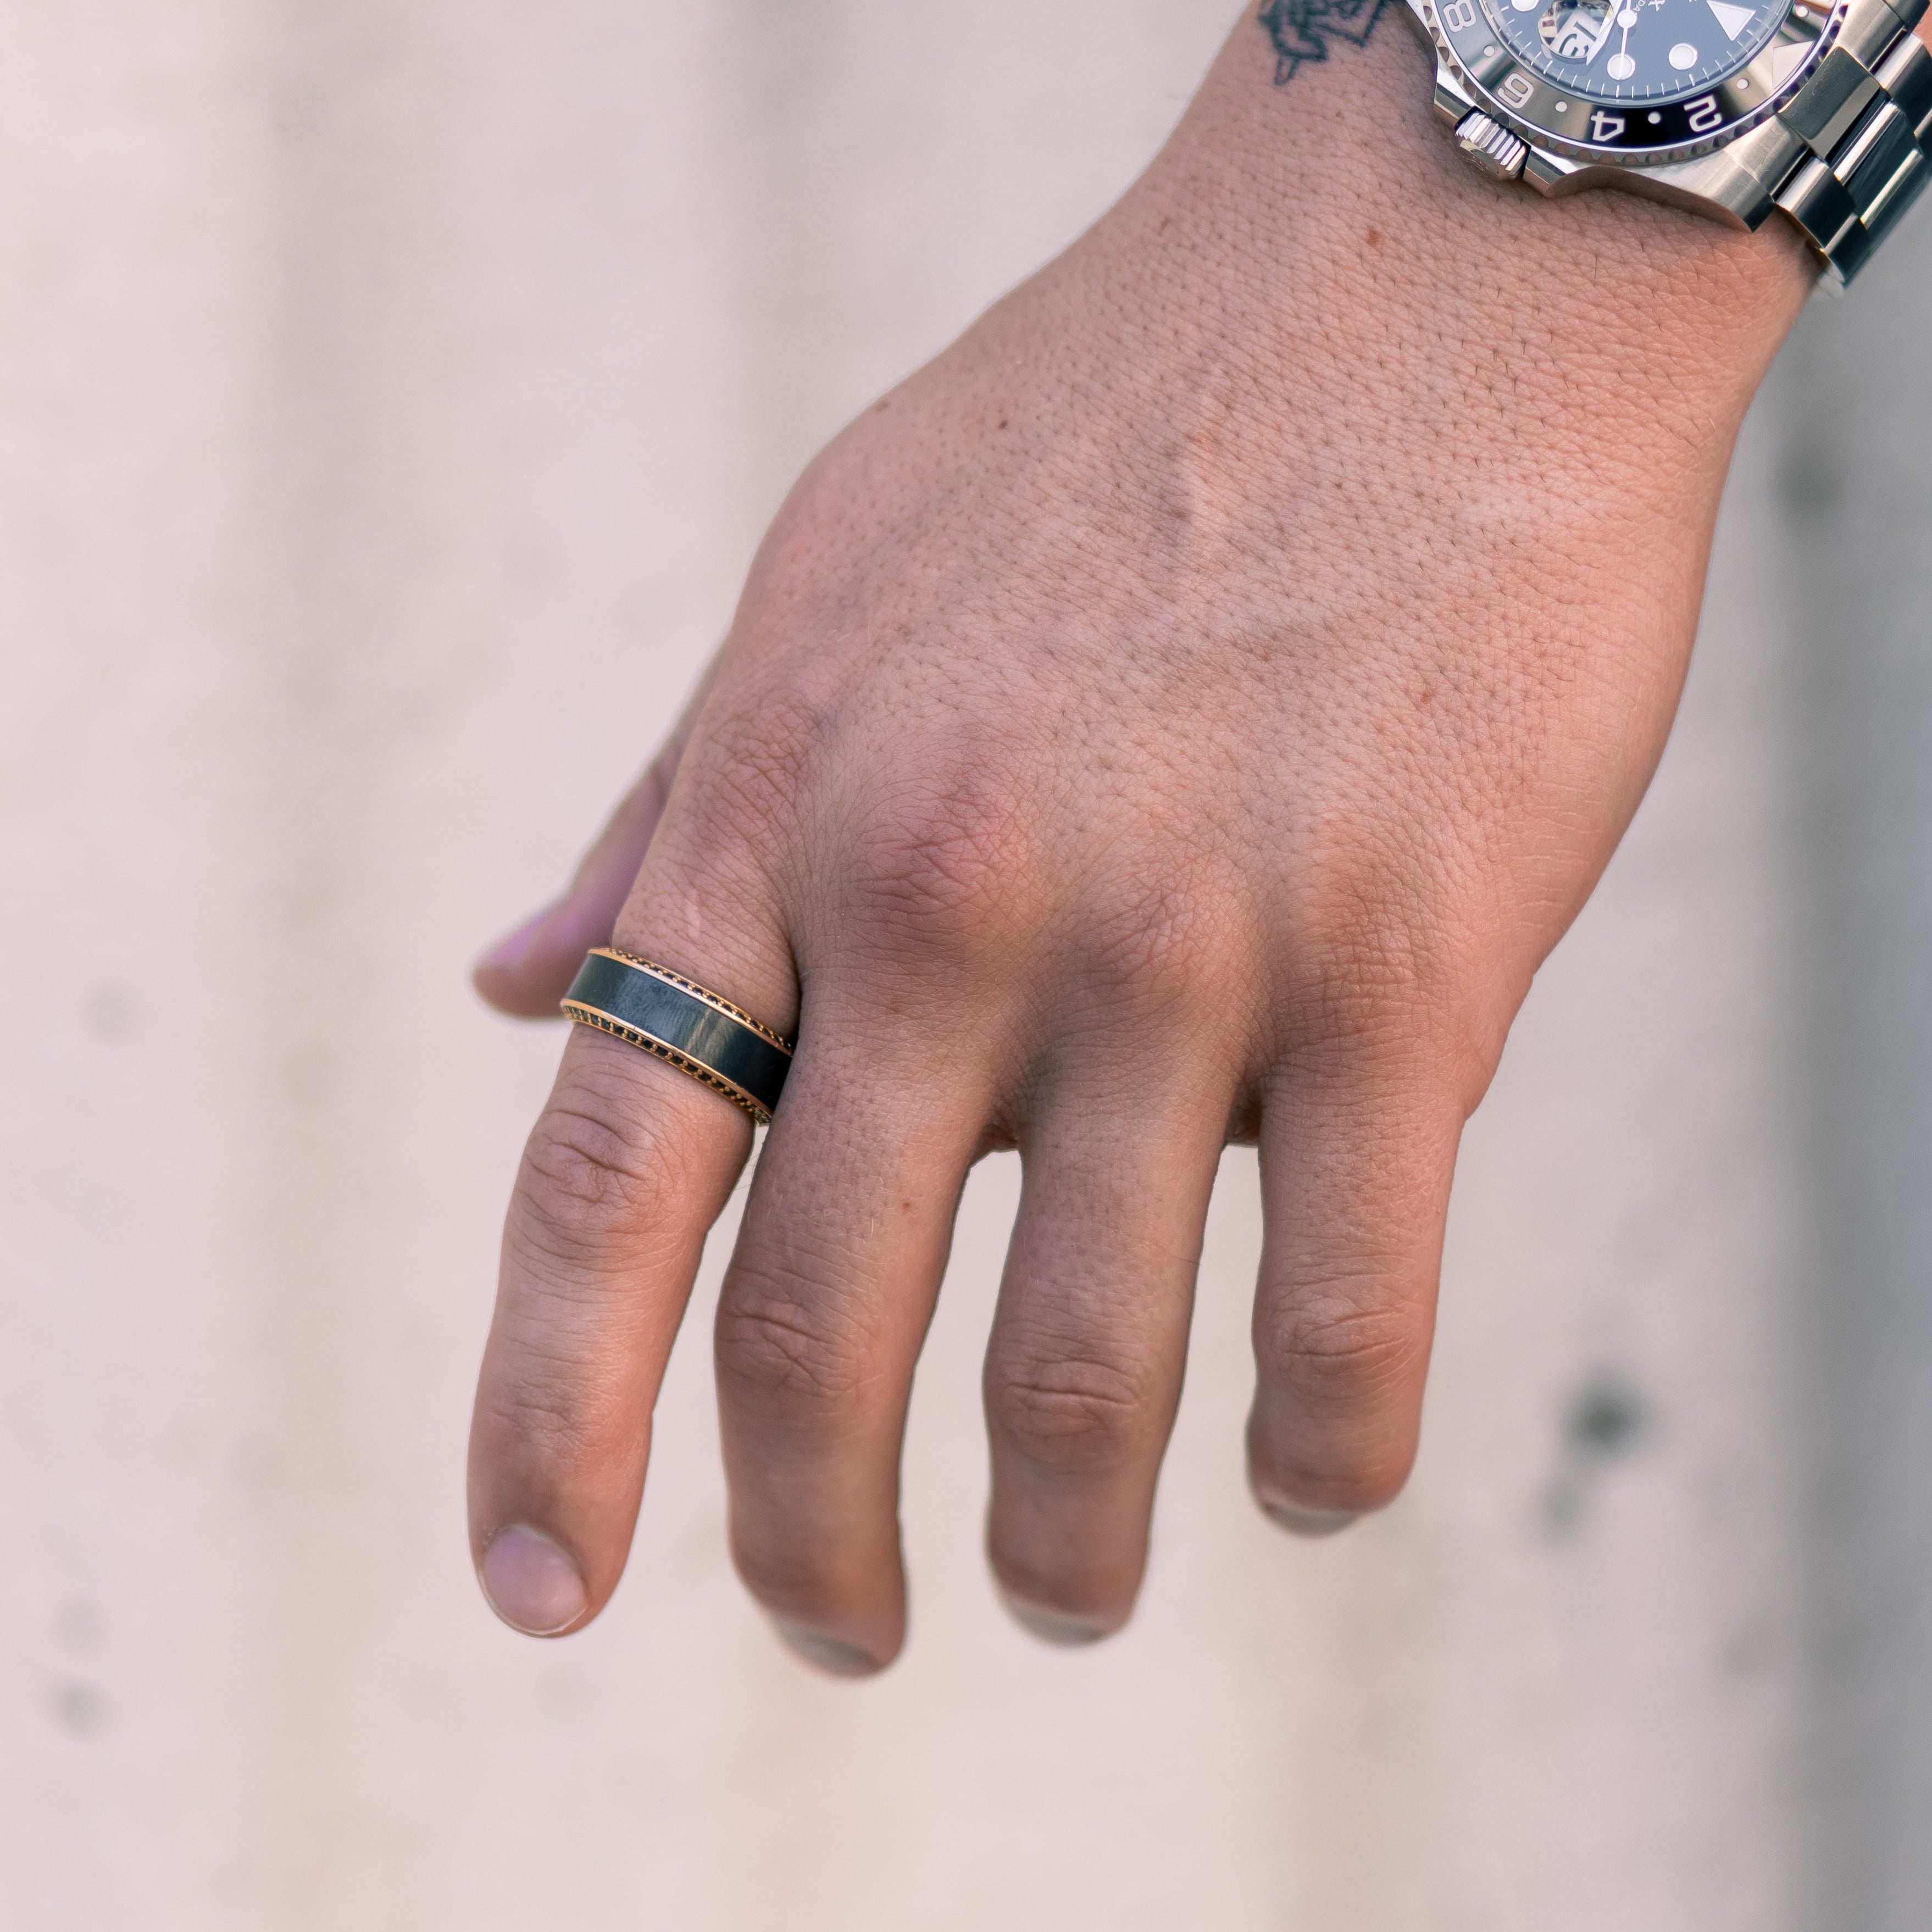 Lifestyle shot #2 of men's hands wearing our HELIOS Rose Gold Band, Black Diamond Inlay, and Black Diamond Insets | ElysiumBlack.com | Men's Black Diamond Wedding Ring